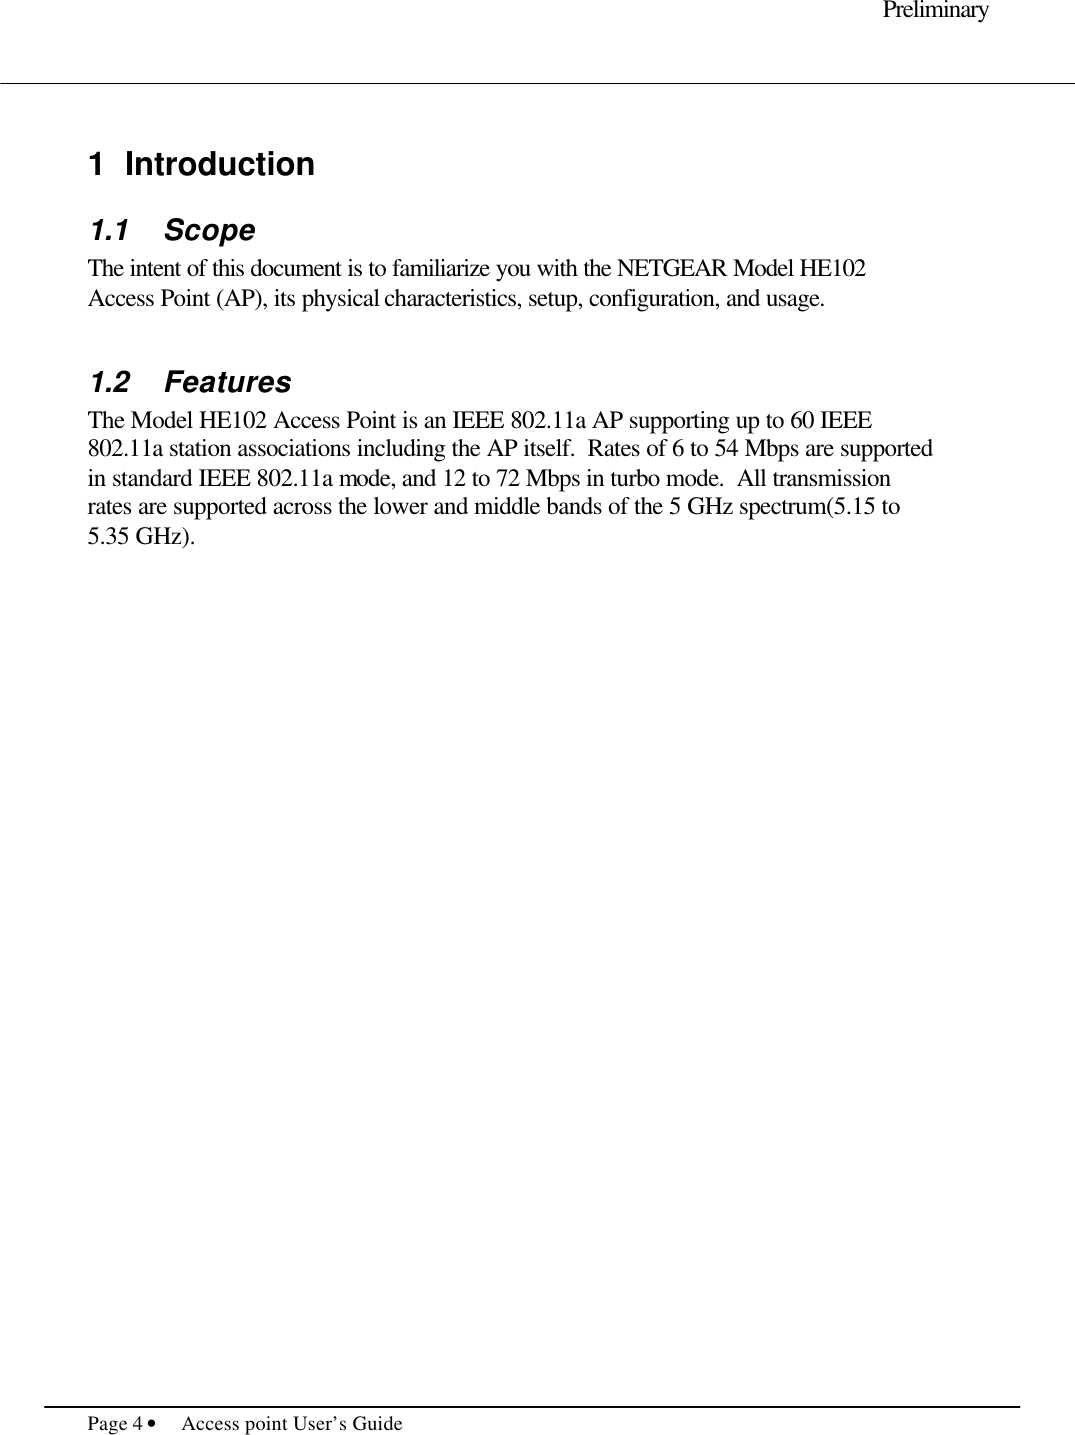     Preliminary  Page 4 • Access point User’s Guide      1 Introduction 1.1 Scope The intent of this document is to familiarize you with the NETGEAR Model HE102 Access Point (AP), its physical characteristics, setup, configuration, and usage.    1.2 Features The Model HE102 Access Point is an IEEE 802.11a AP supporting up to 60 IEEE 802.11a station associations including the AP itself.  Rates of 6 to 54 Mbps are supported in standard IEEE 802.11a mode, and 12 to 72 Mbps in turbo mode.  All transmission rates are supported across the lower and middle bands of the 5 GHz spectrum(5.15 to 5.35 GHz).             